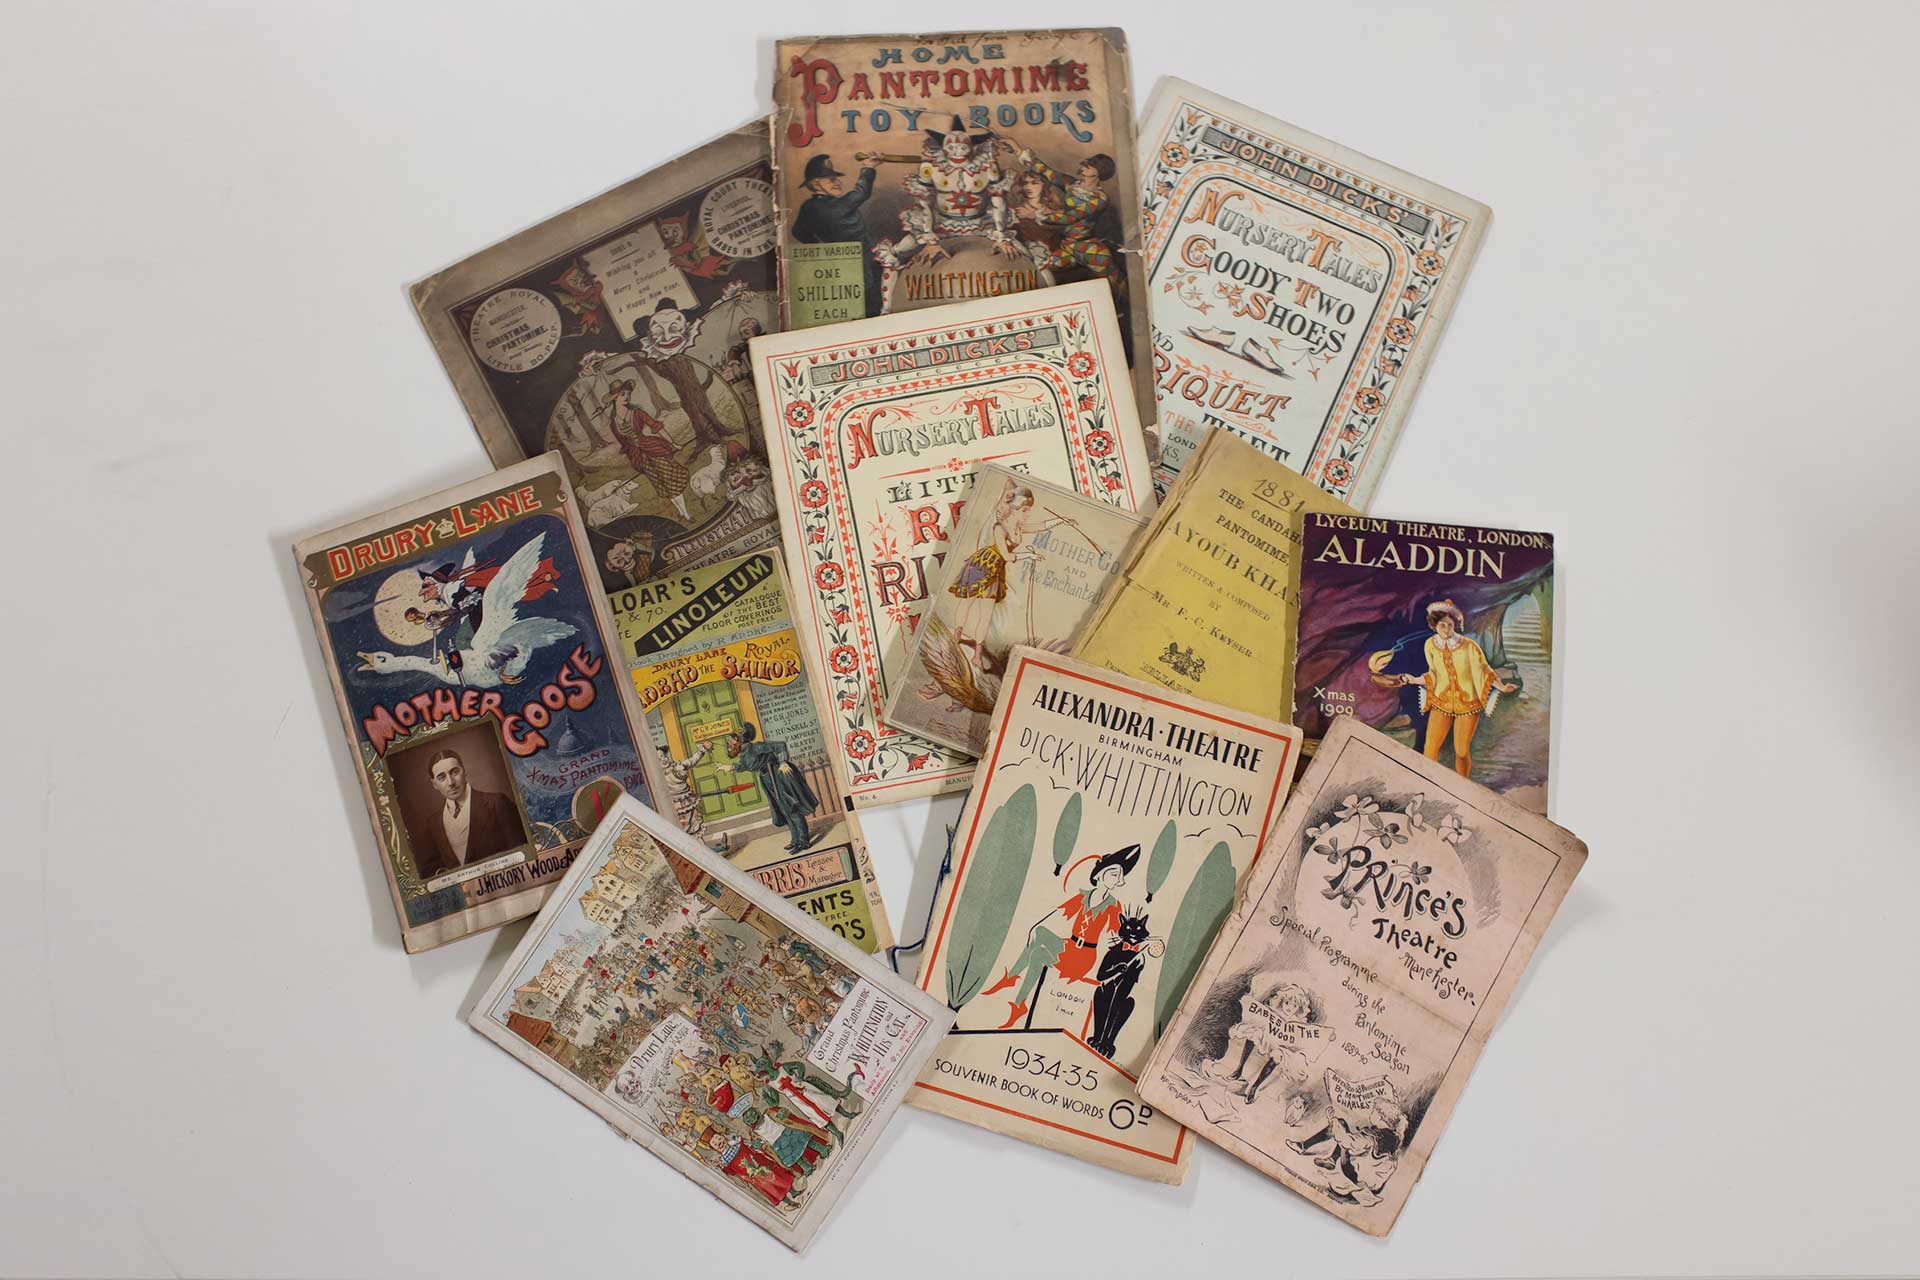 Toy books and libretti from the David Drummond Pantomime Collection